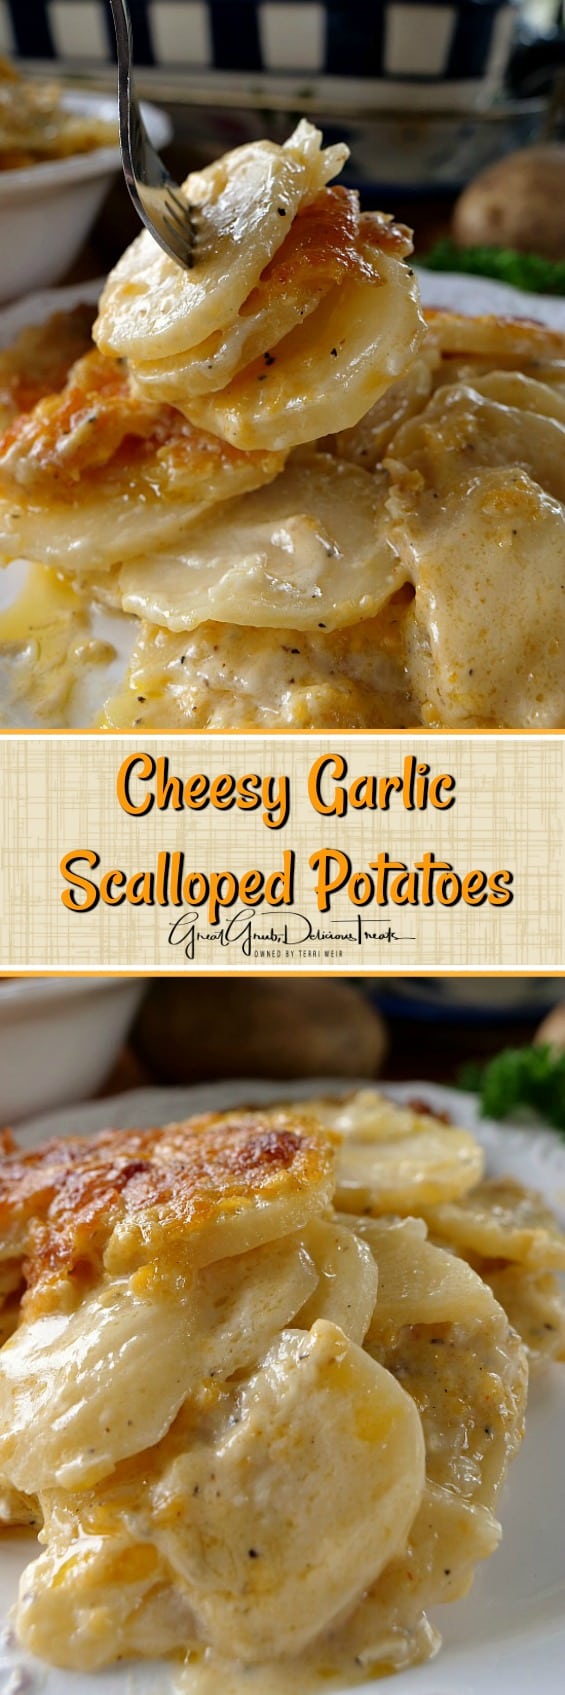 A double collage pin of Cheesy Garlic Scalloped Potatoes.